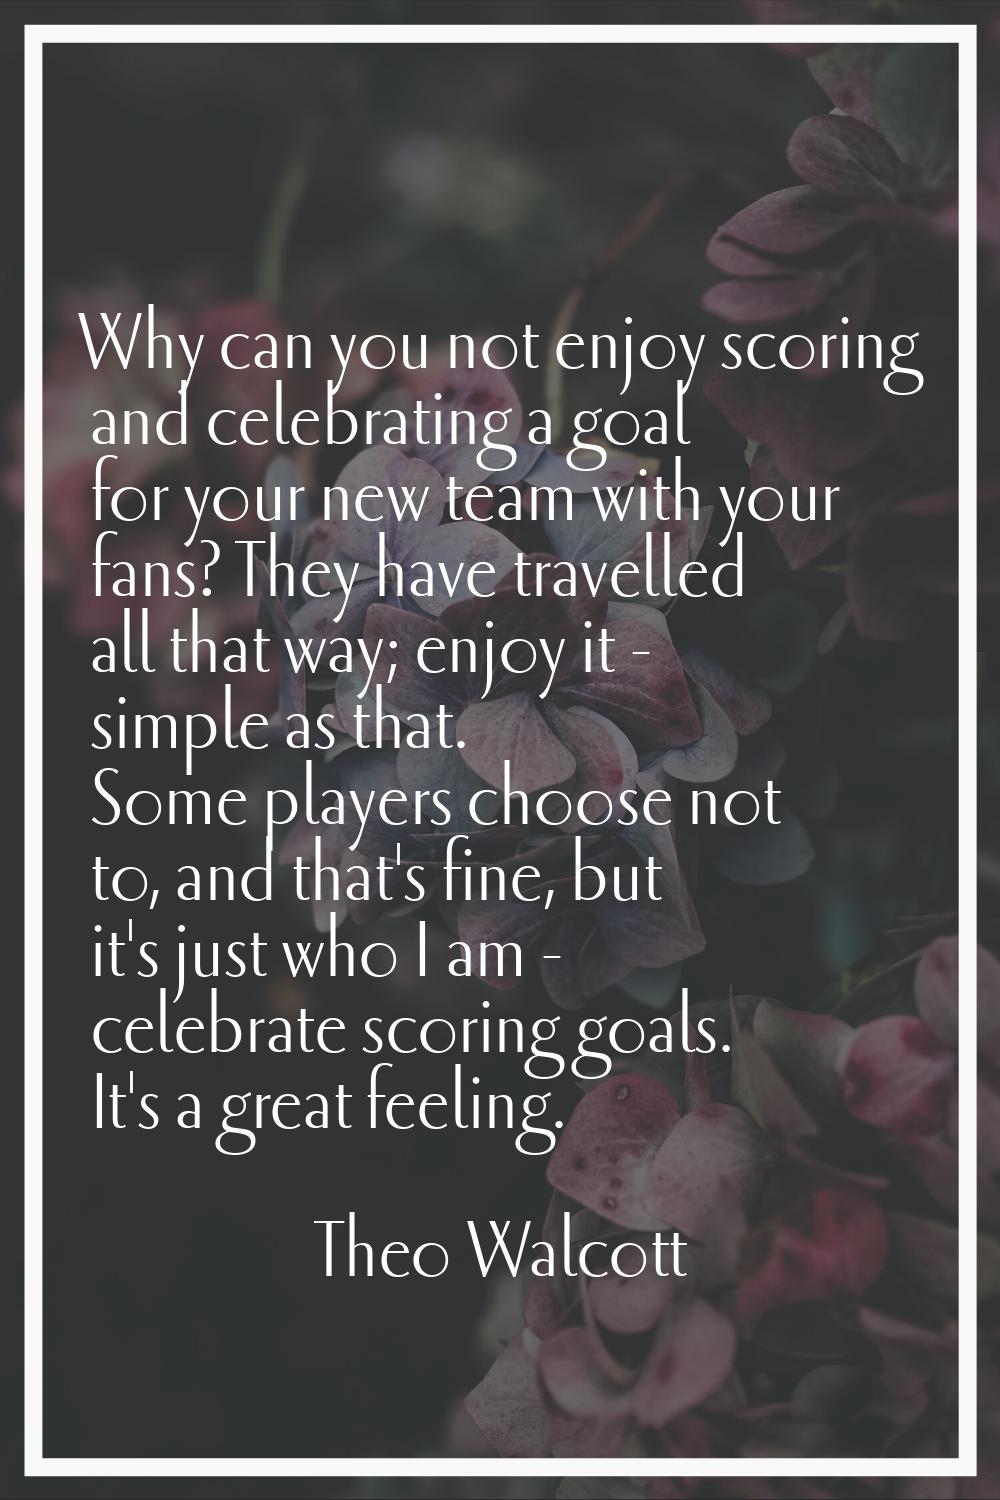 Why can you not enjoy scoring and celebrating a goal for your new team with your fans? They have tr